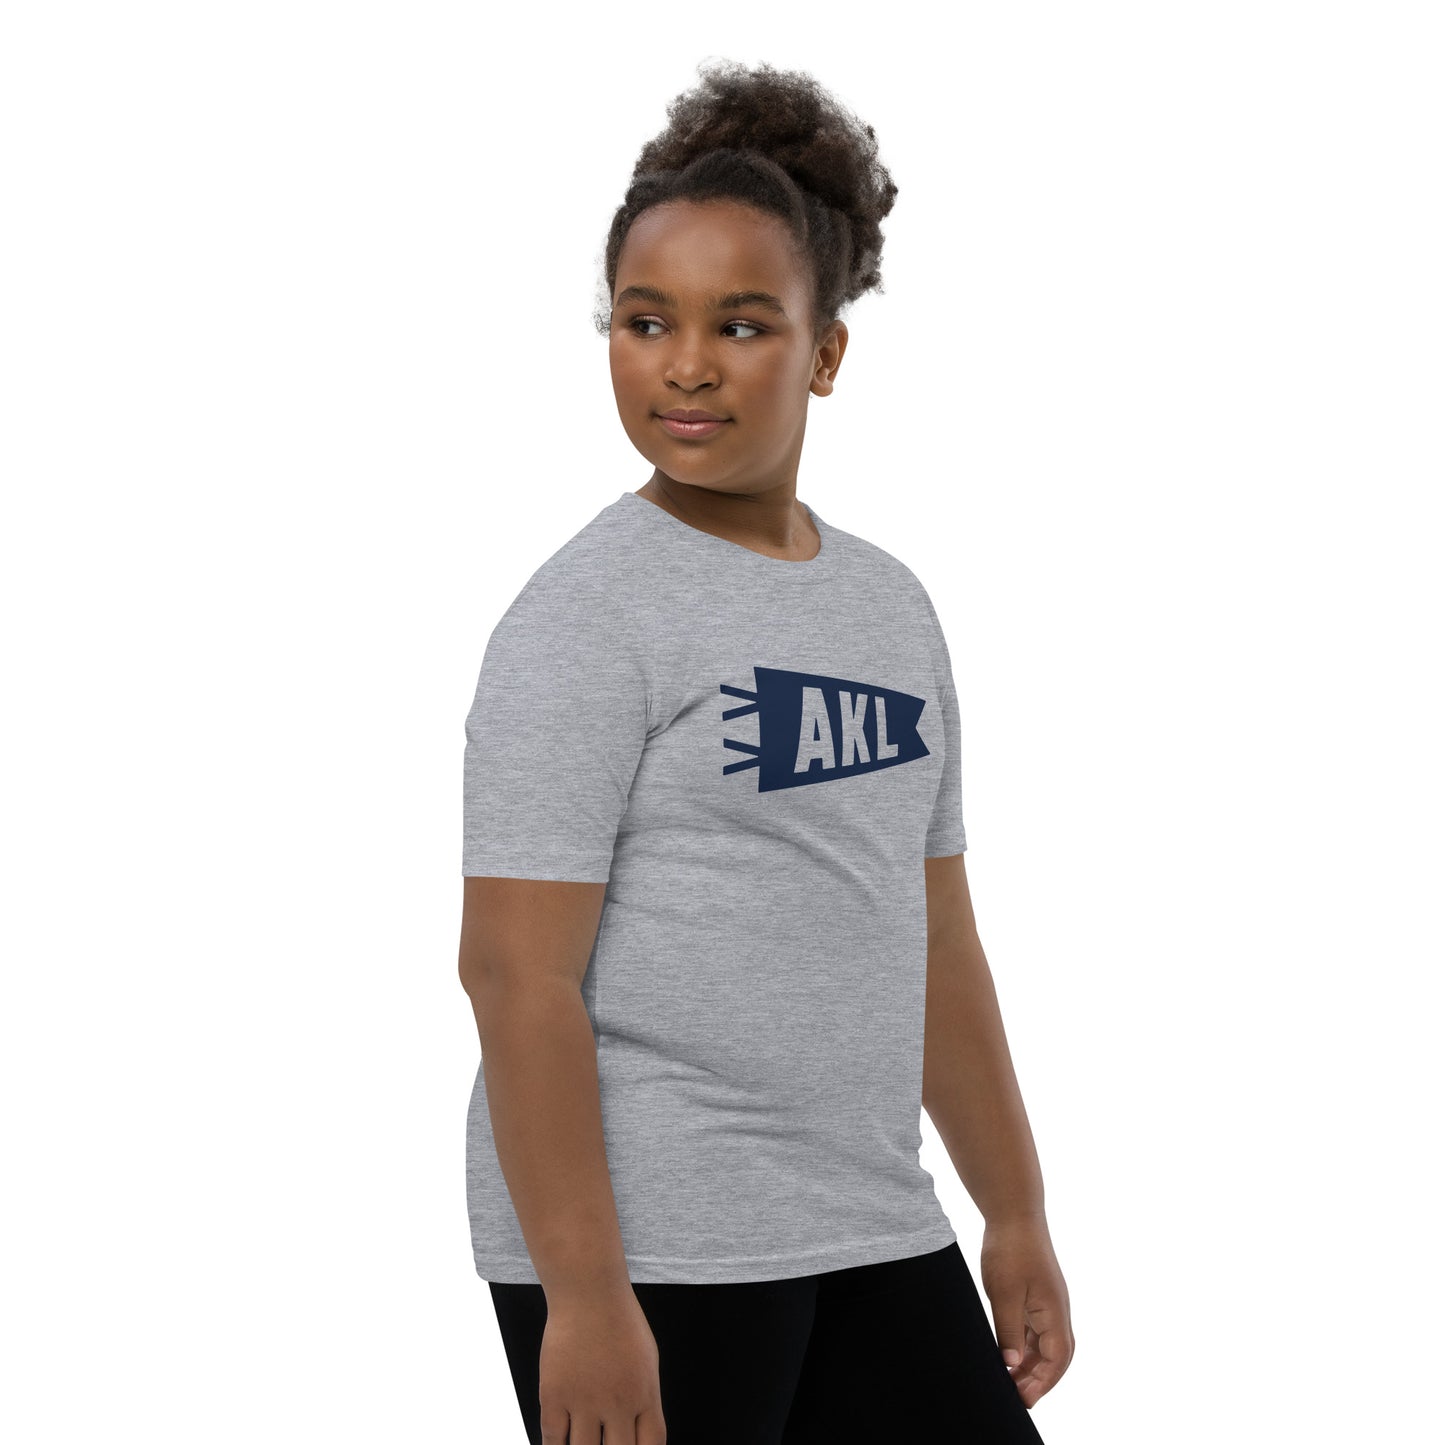 Kid's Airport Code Tee - Navy Blue Graphic • AKL Auckland • YHM Designs - Image 03